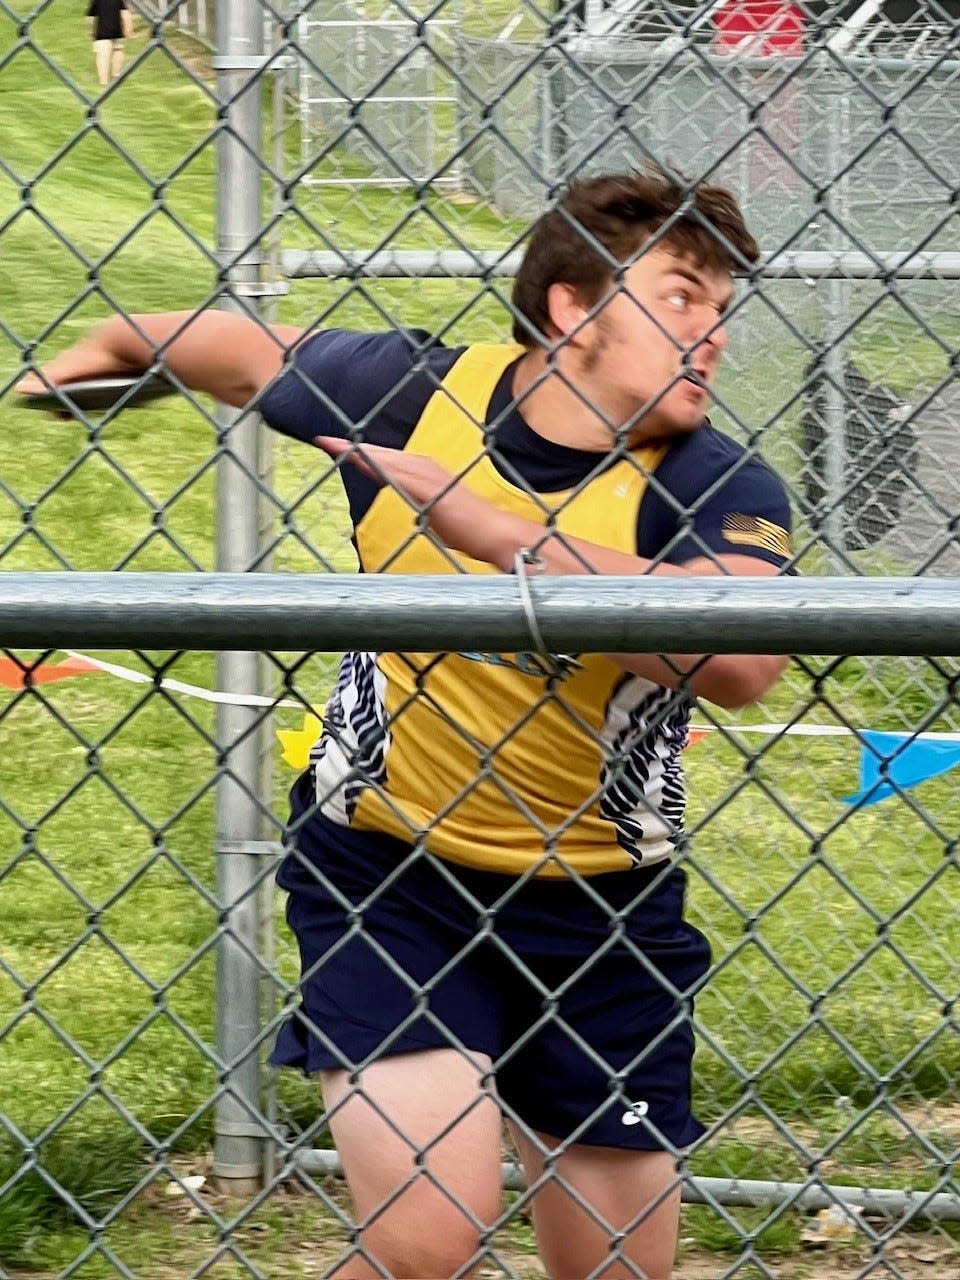 River Valley's Ethan Lyon set the Mid Ohio Athletic Conference boys discus record during Tuesday's action at Harding Stadium.